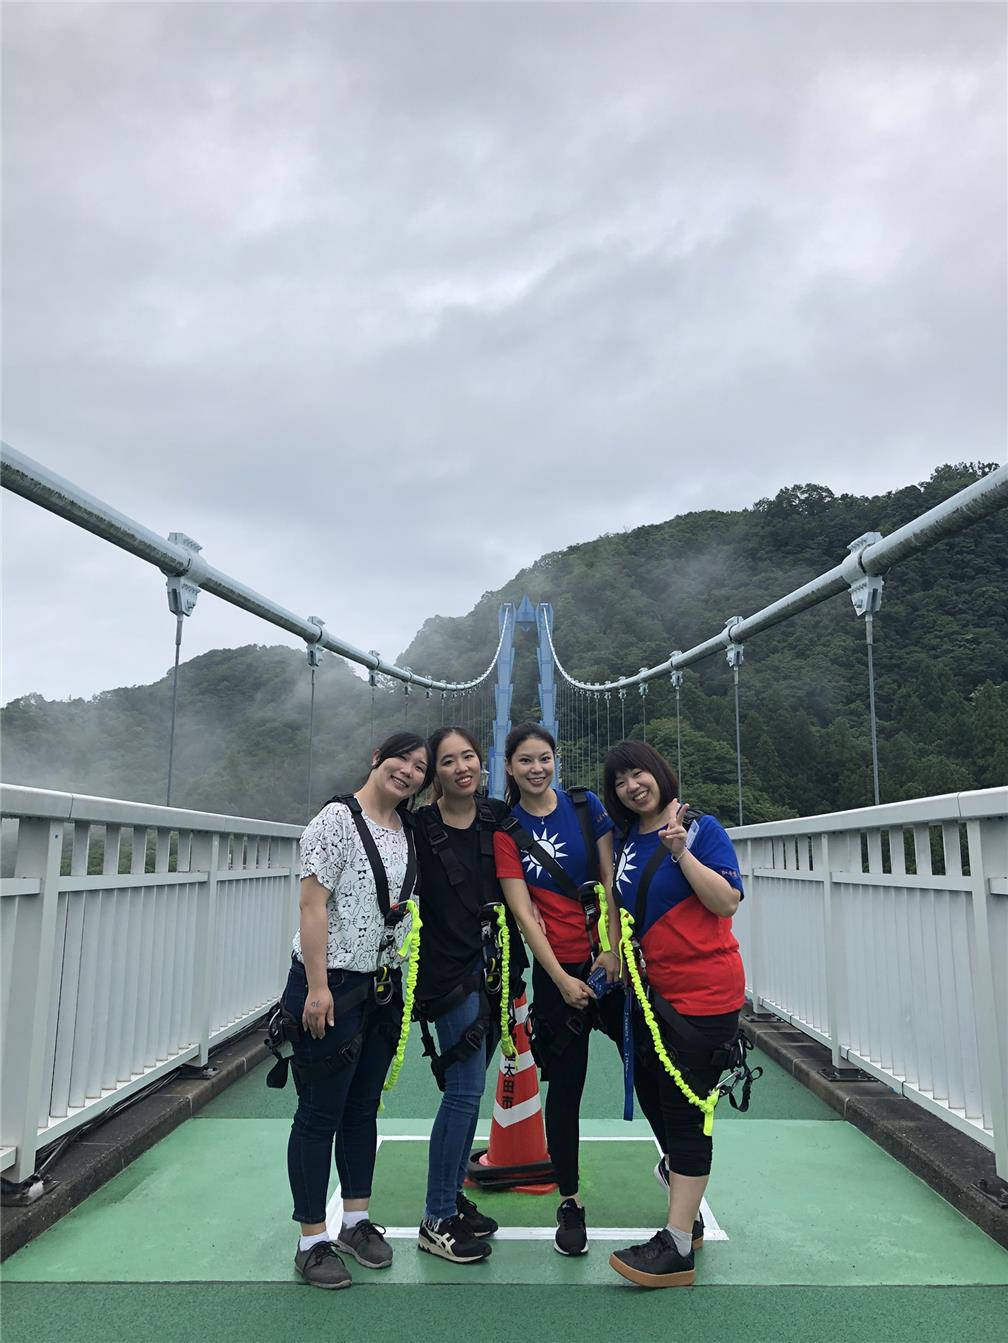 The Ryujin Suspension Bridge where bungee jumping is located is a famous scenic area. Even if you don’t participate in bungee jumping, you can buy tickets to visit.